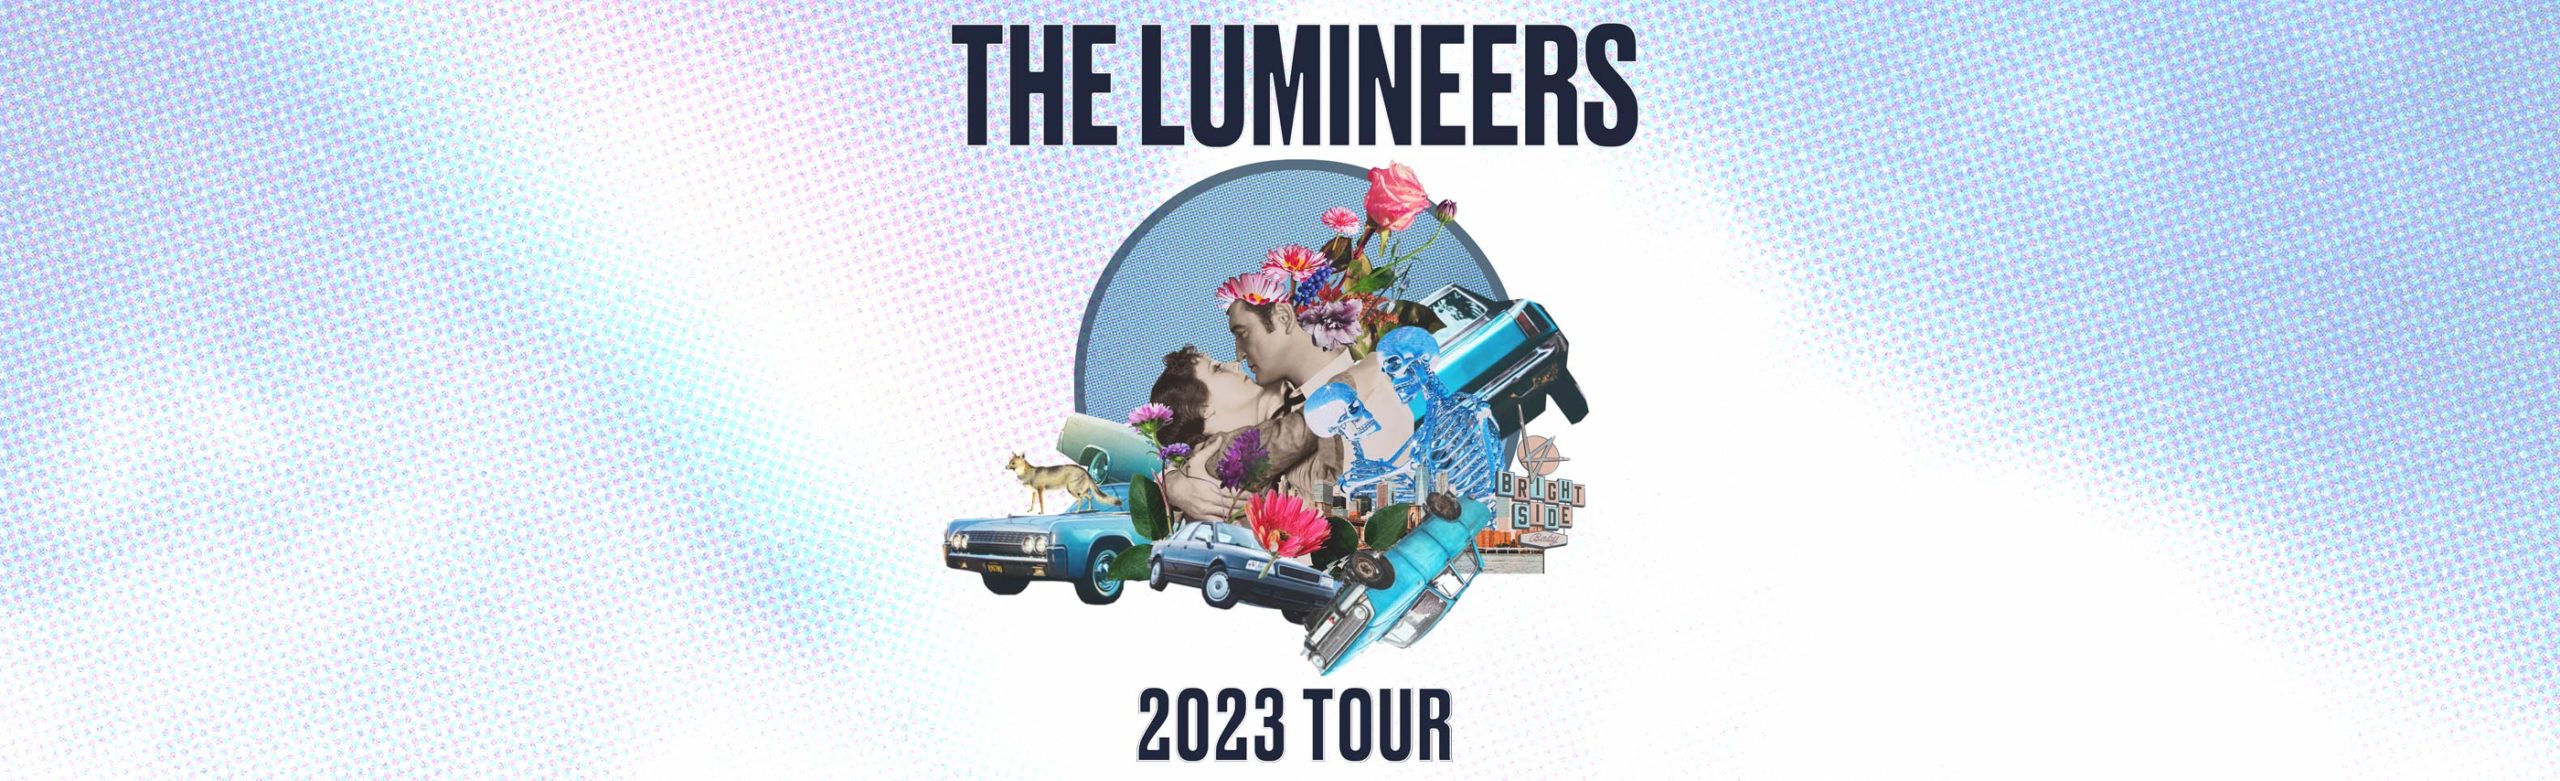 Important Ticketing Update for The Lumineers Image